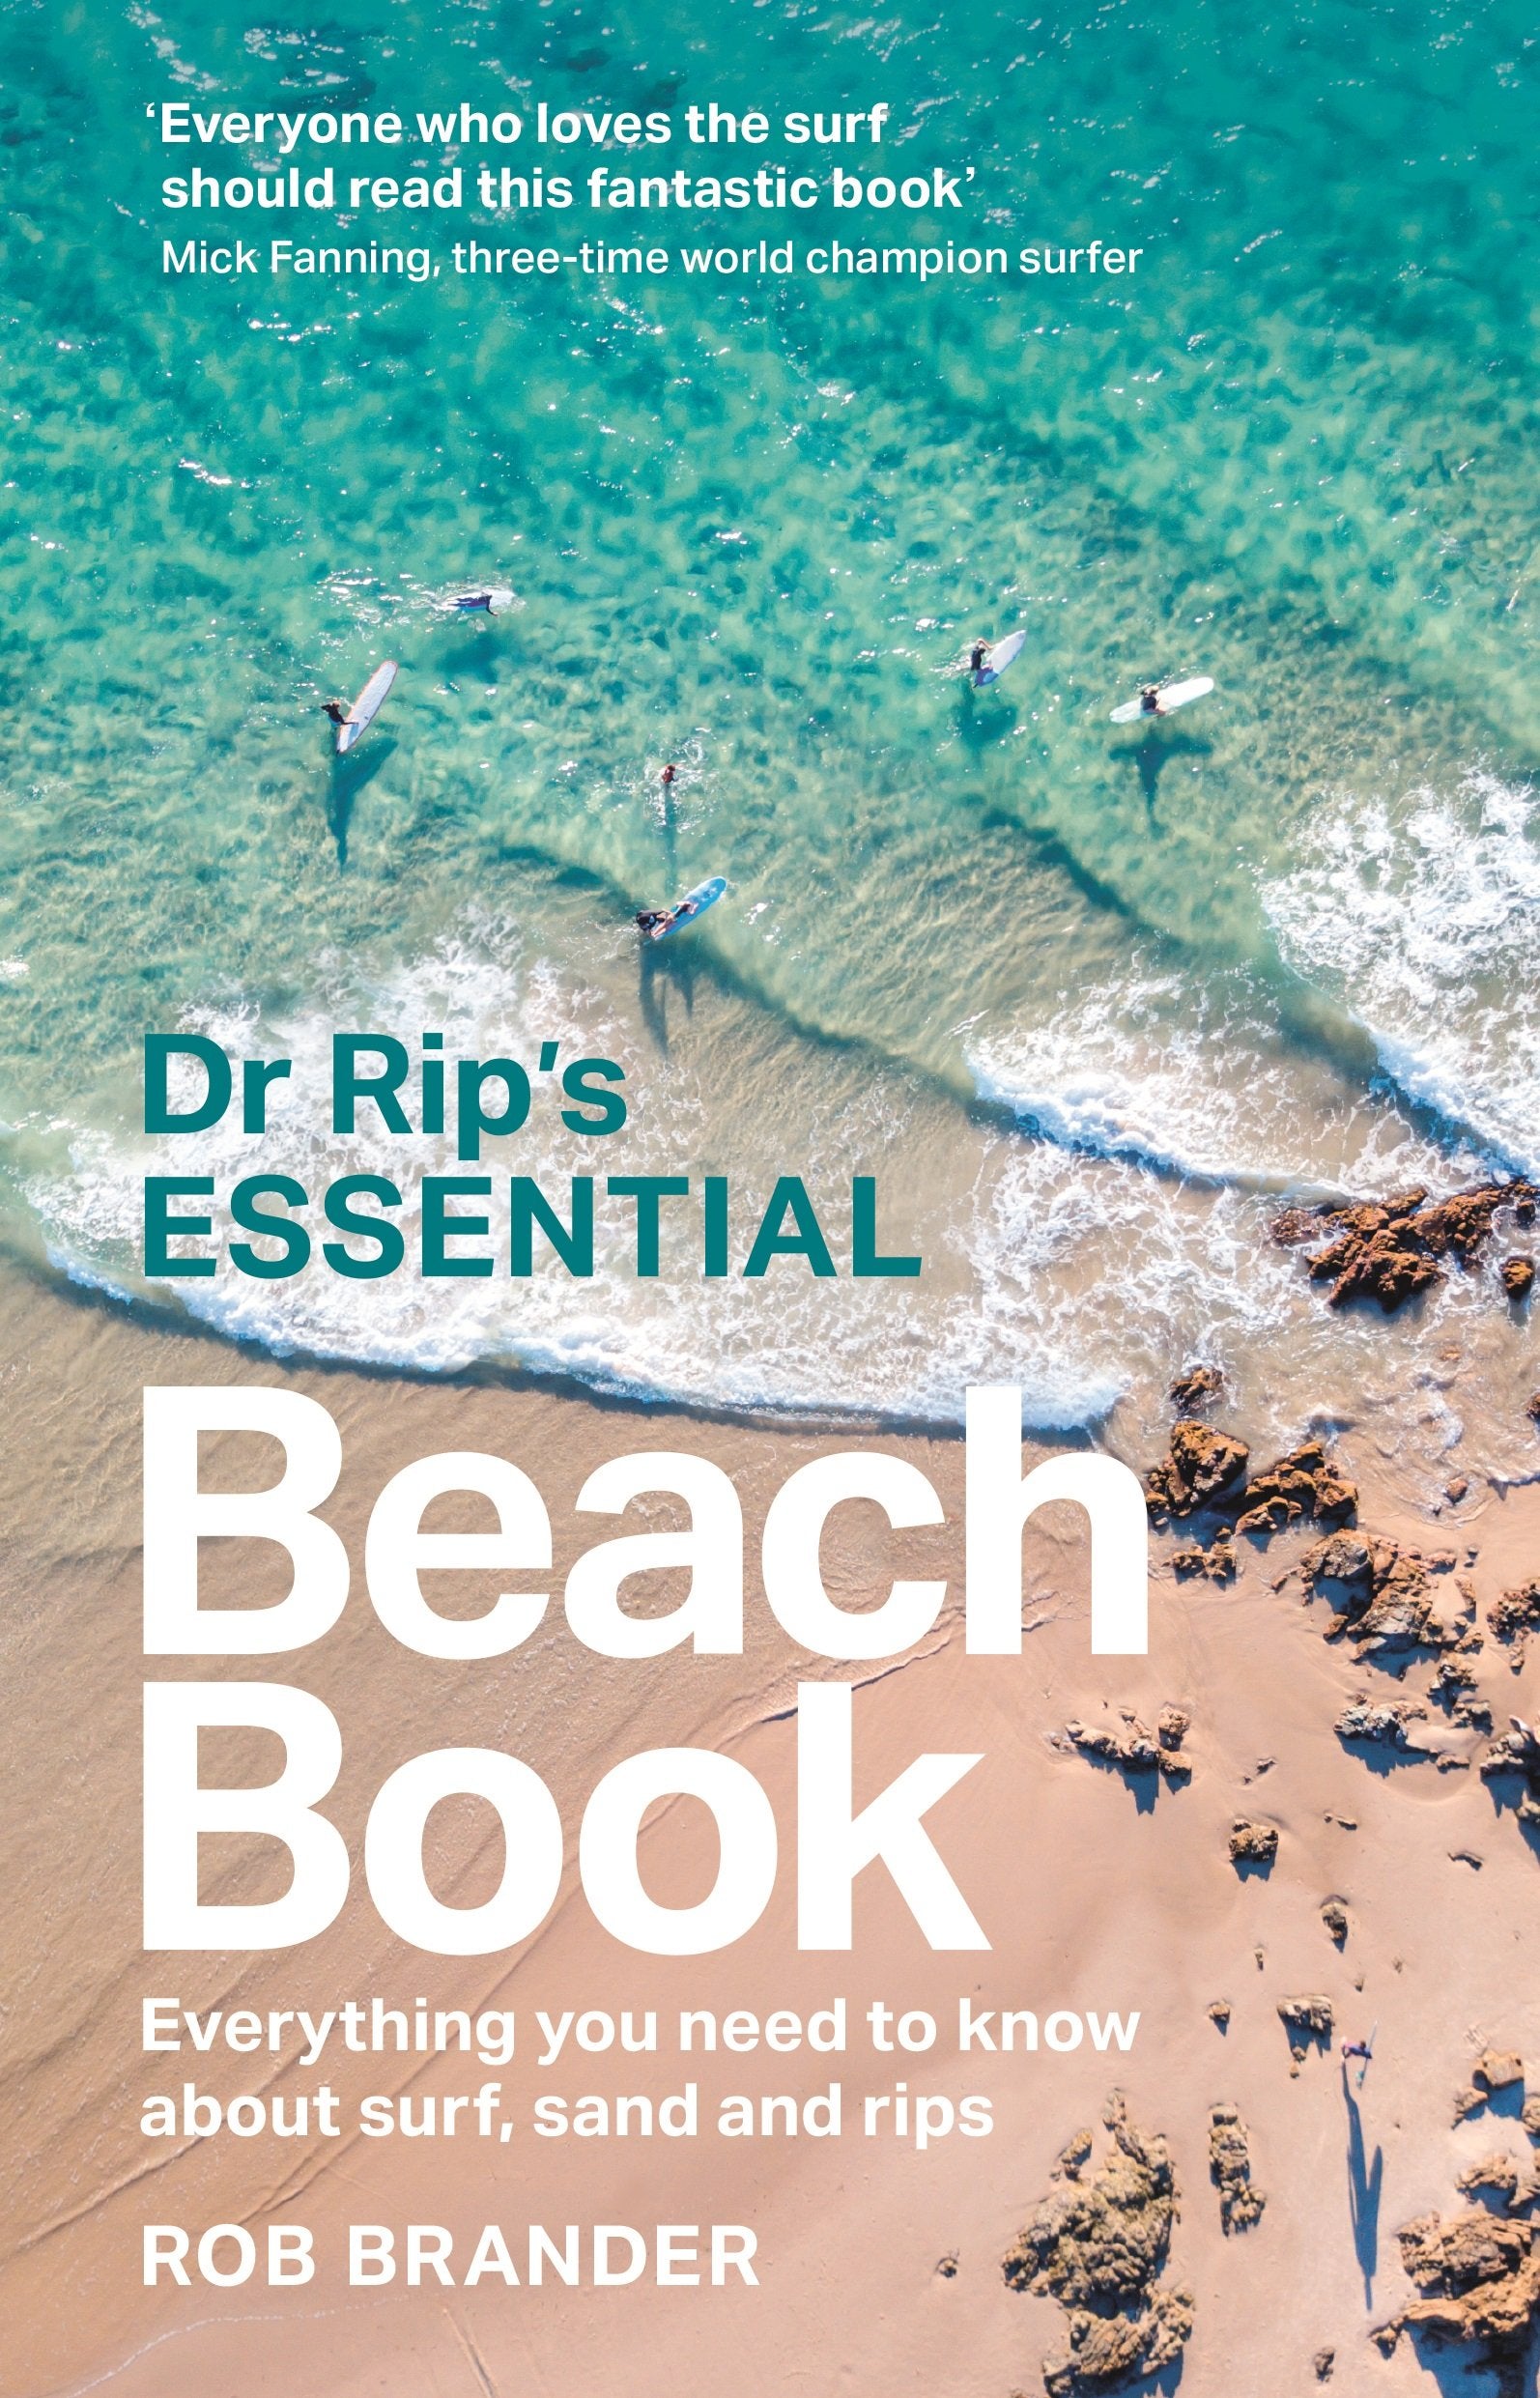 Dr Rip's Essential Beach Book: Everything You Need to Know About Surf, Sand and Rips